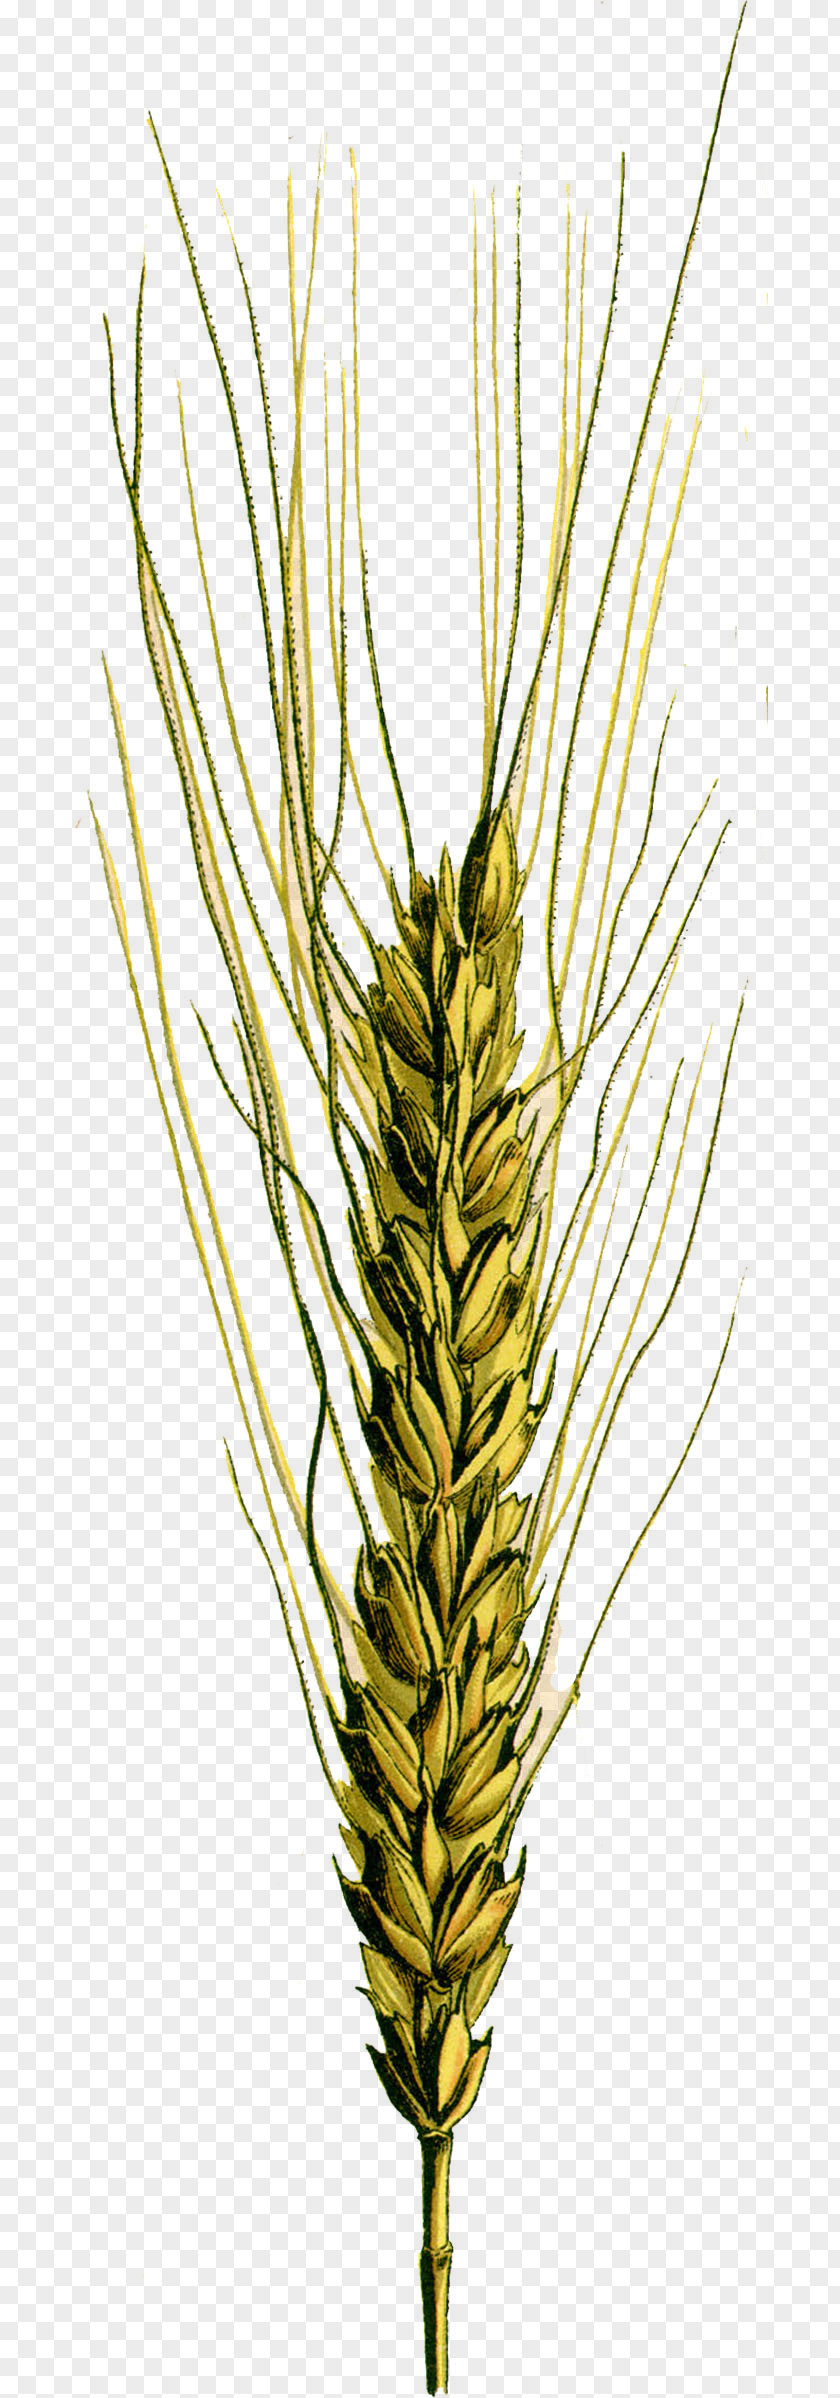 Common Reed Emmer Wheat Spelt Einkorn Cereal Germ PNG